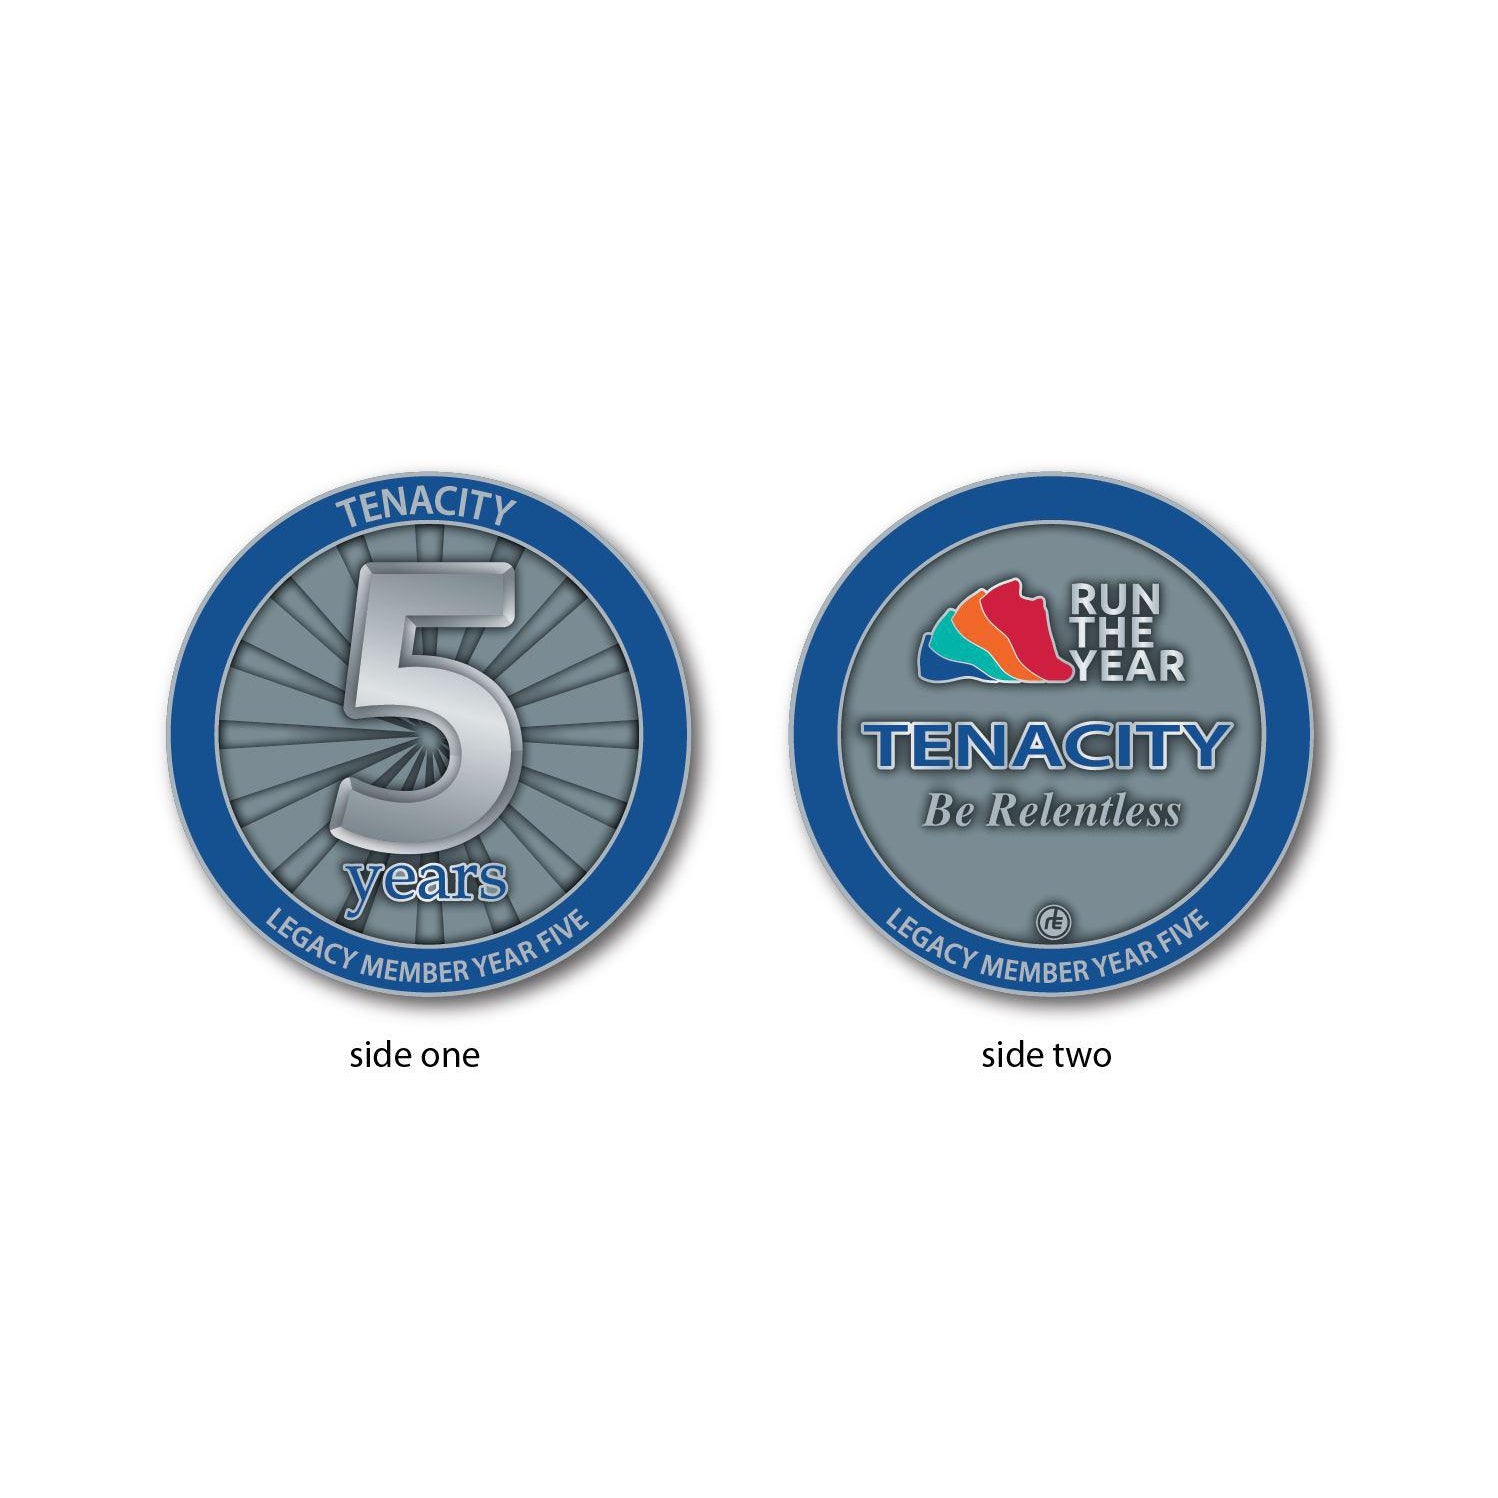 Legacy Coins Virtual Fitness Challenge Medals | Run The Edge